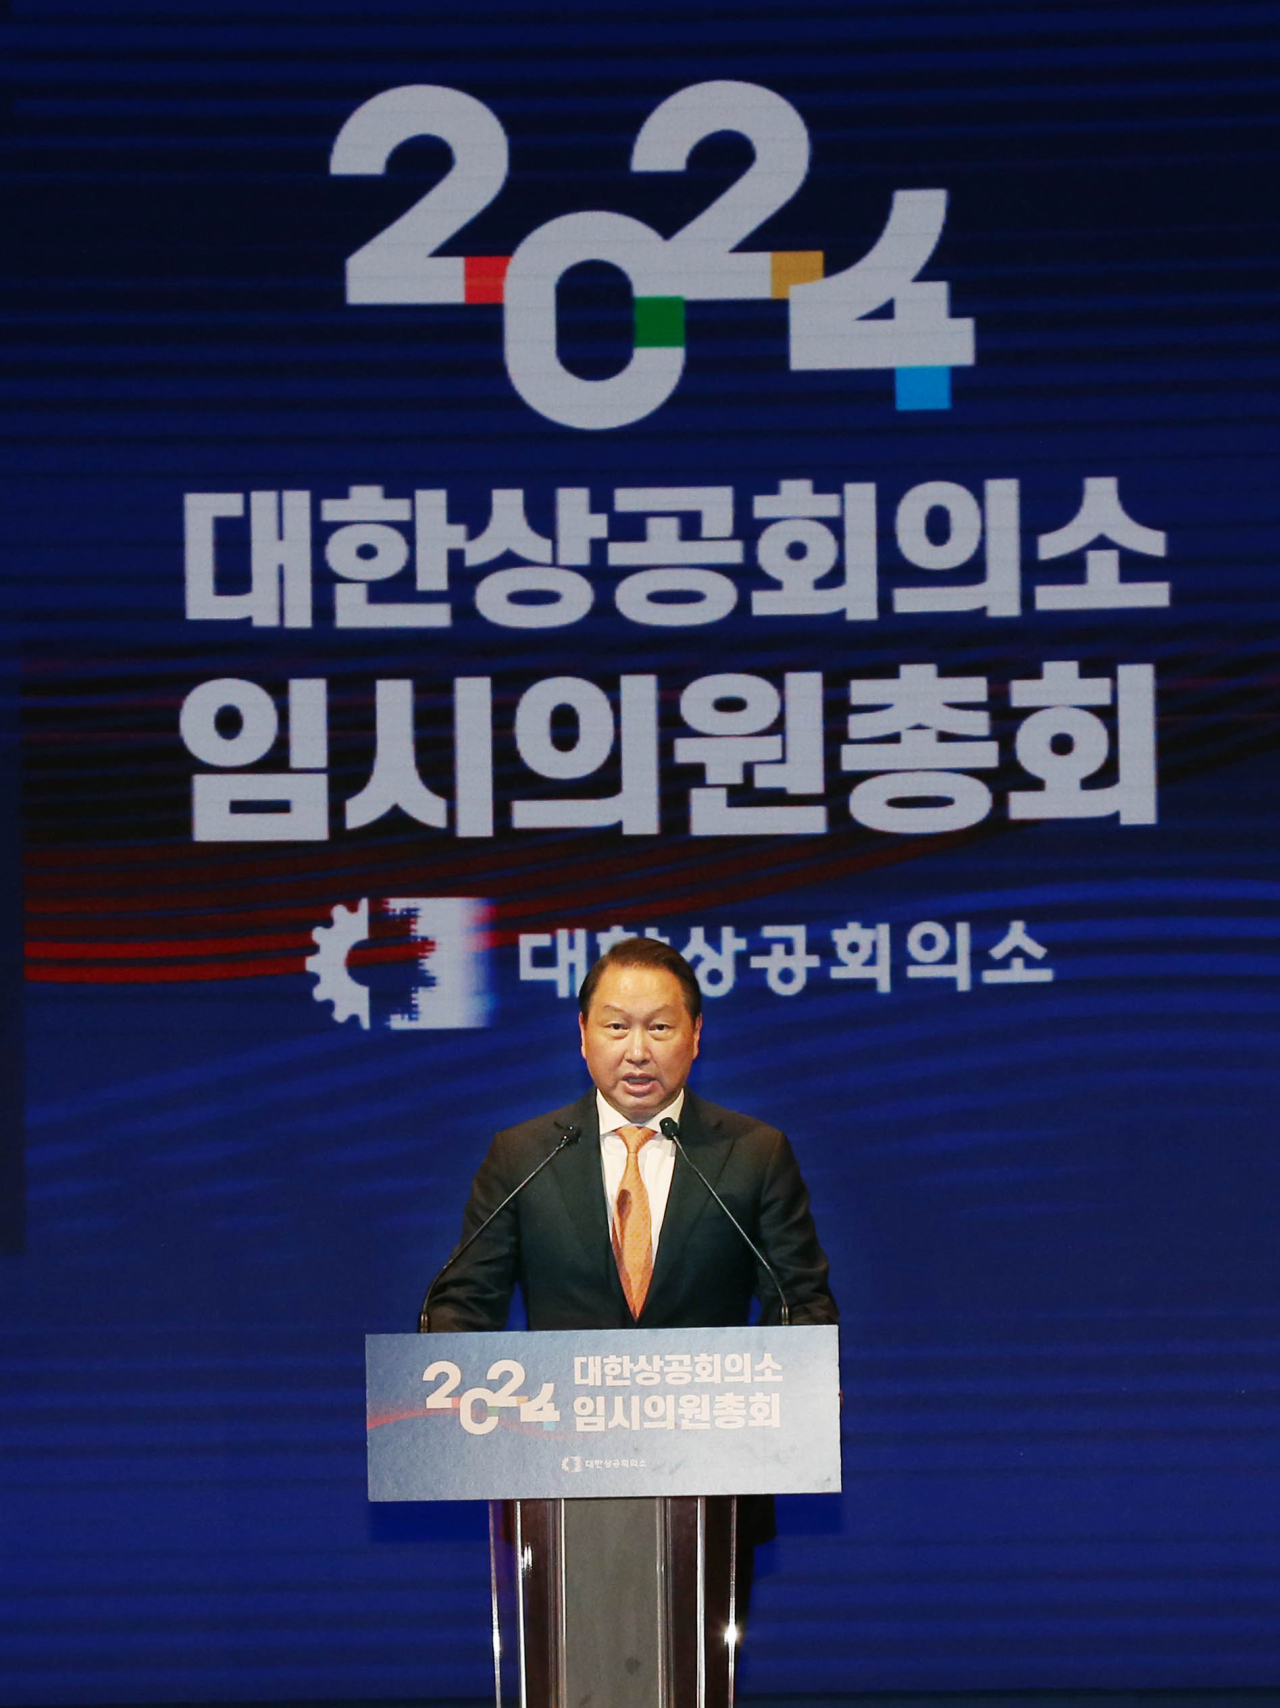 SK Group Chairman Chey Tae-won who was reelected as chair of the Korea Chamber of Commerce and Industry speaks during the KCCI's extraordinary general meeting held in Seoul on Thursday. (KCCI)